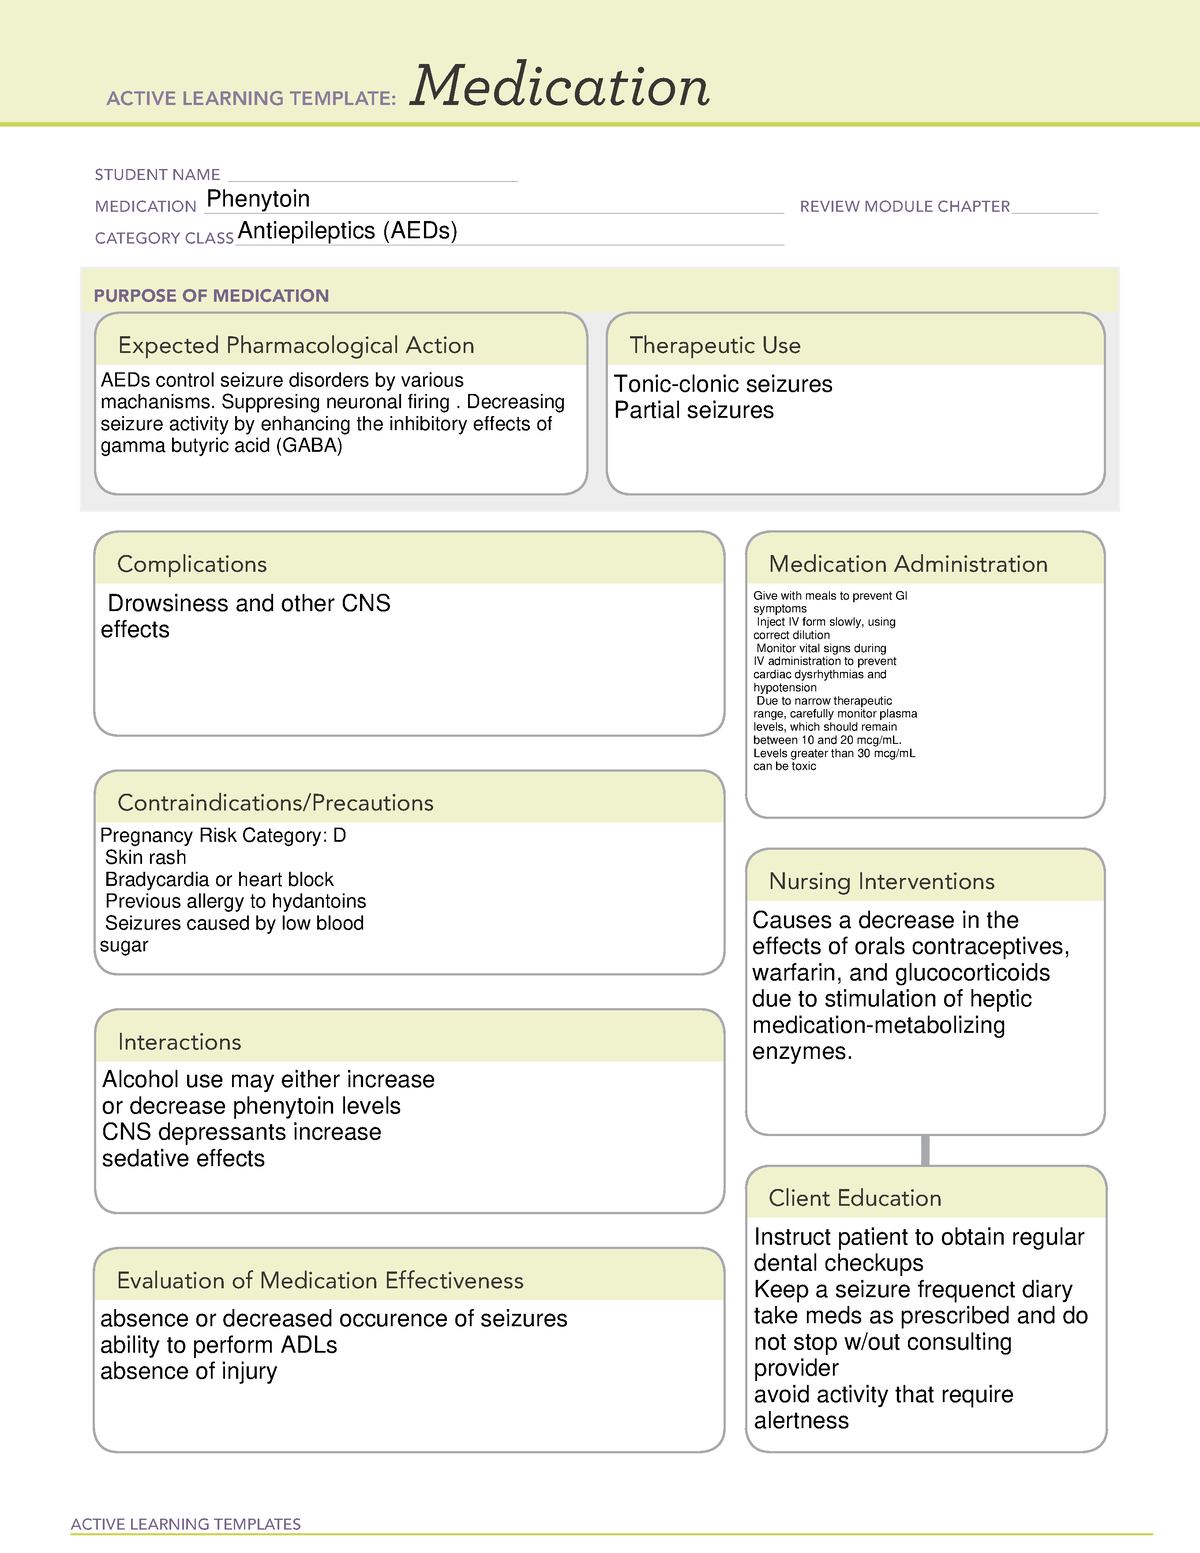 ati-medication-card-template-phenytoin-active-learning-templates-medication-student-name-studocu